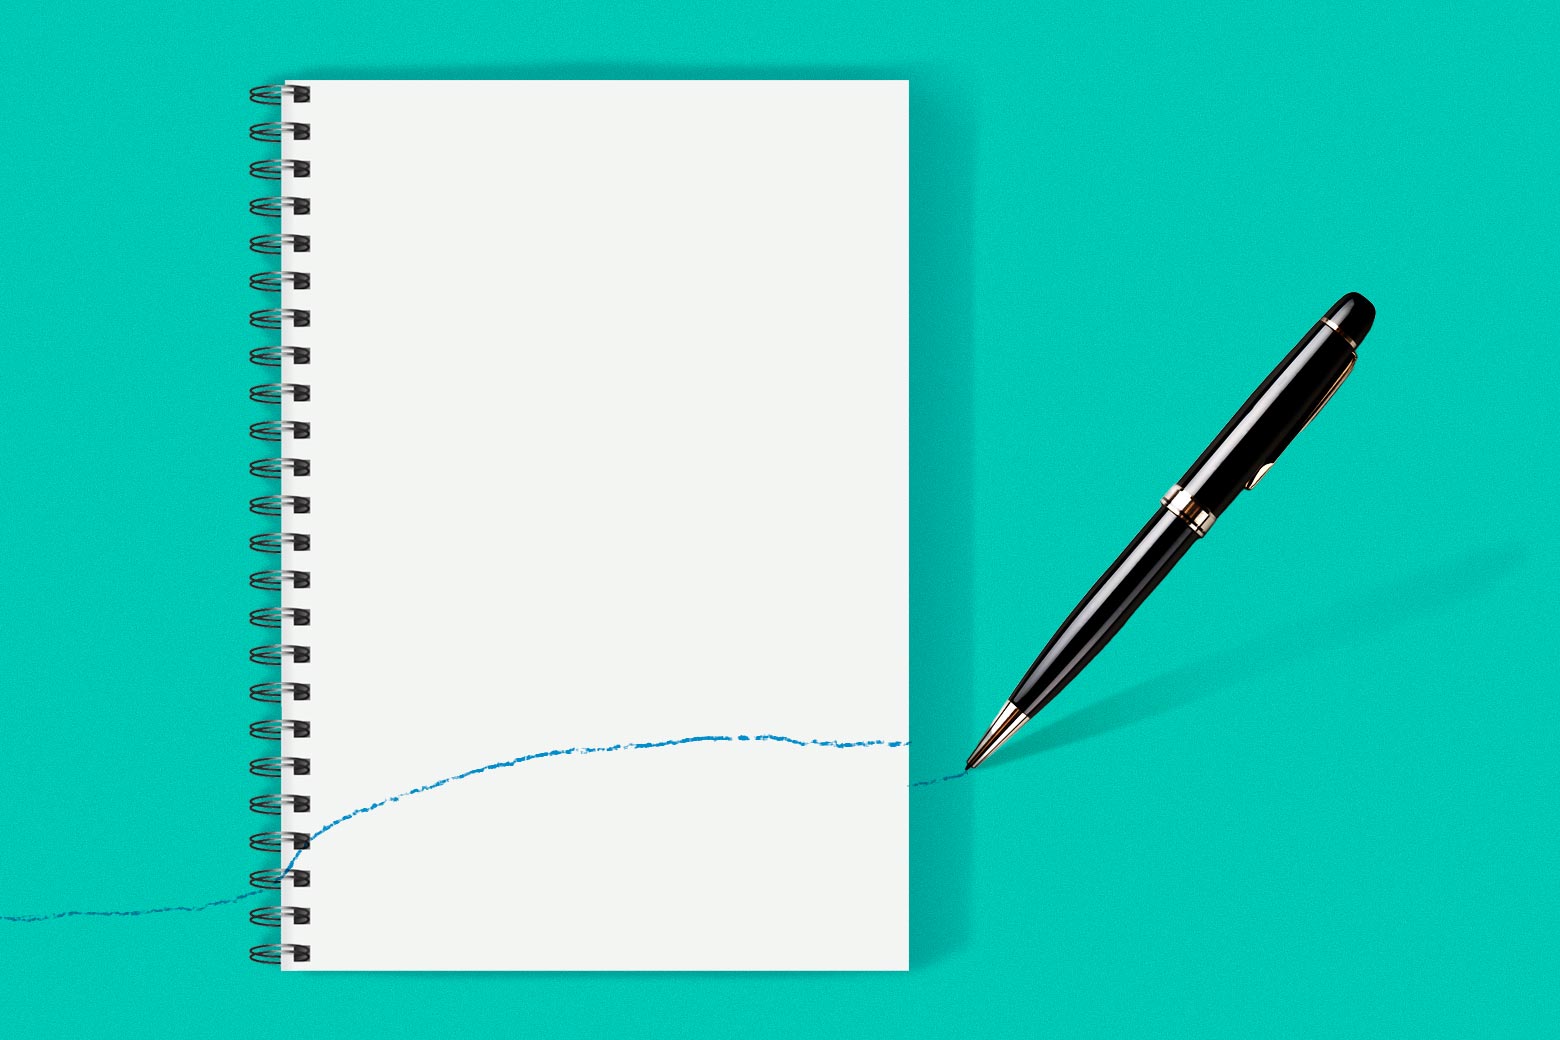 A notepad with a pen next to it that's already drawn a single line across the blank page